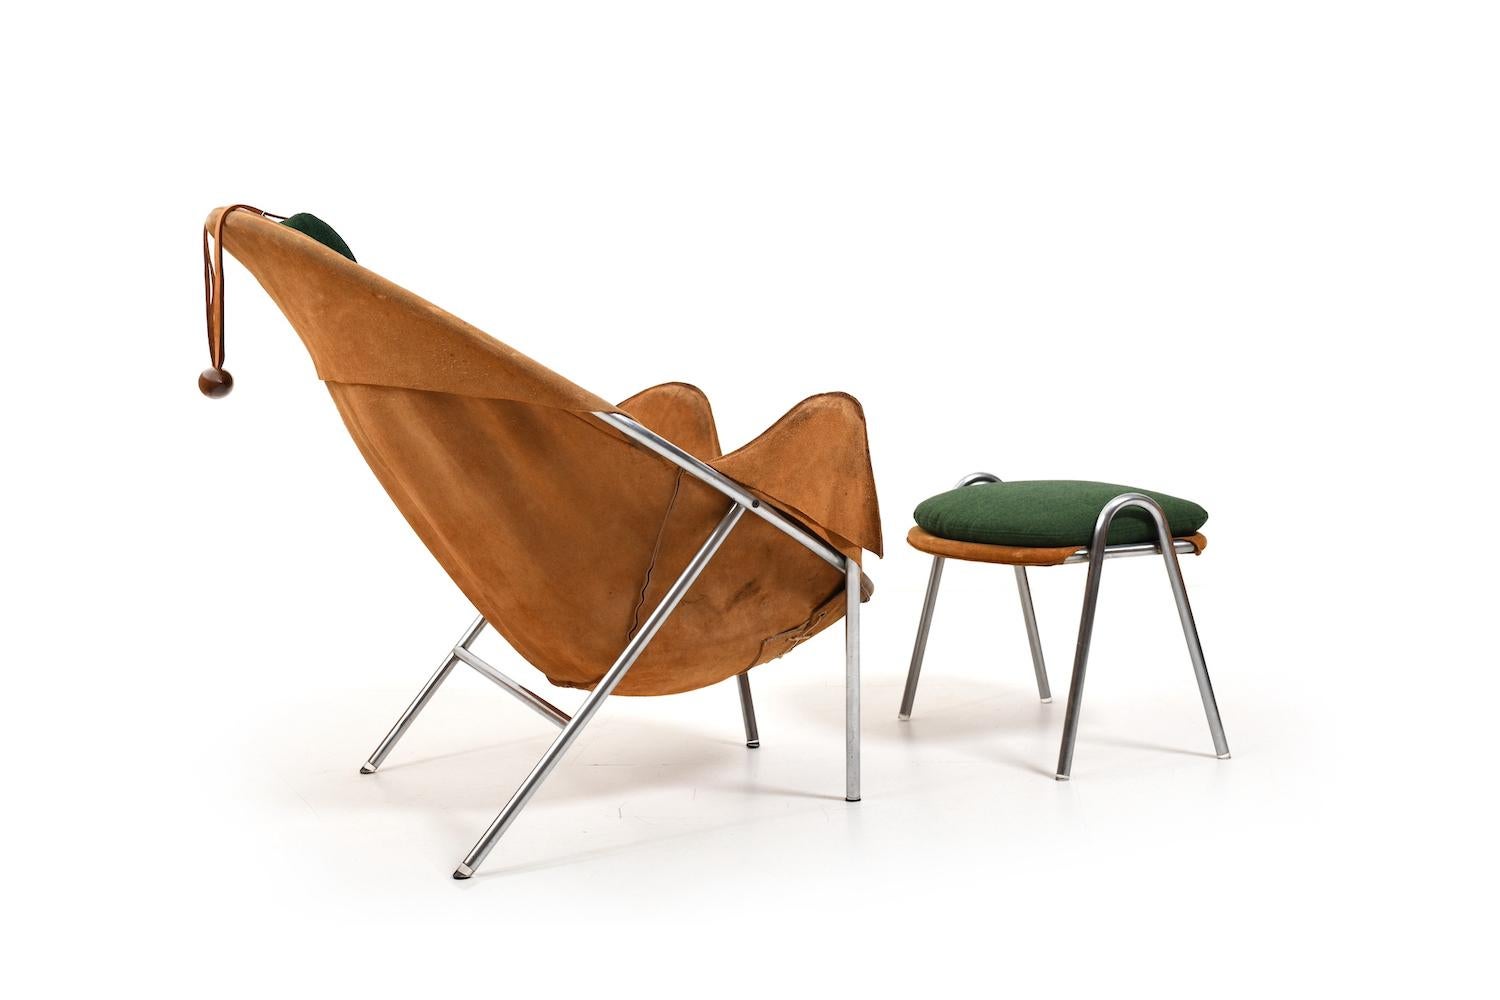 Rare offered lounge chair and footstool, model BO-360 by Erik Ole Jørgensen for Bovirke Denmark 1953. In cognac colored natural suede leather and green cushions. Base in chromed metal. Original condition! Denmark, 1950s. The footstool comes with new